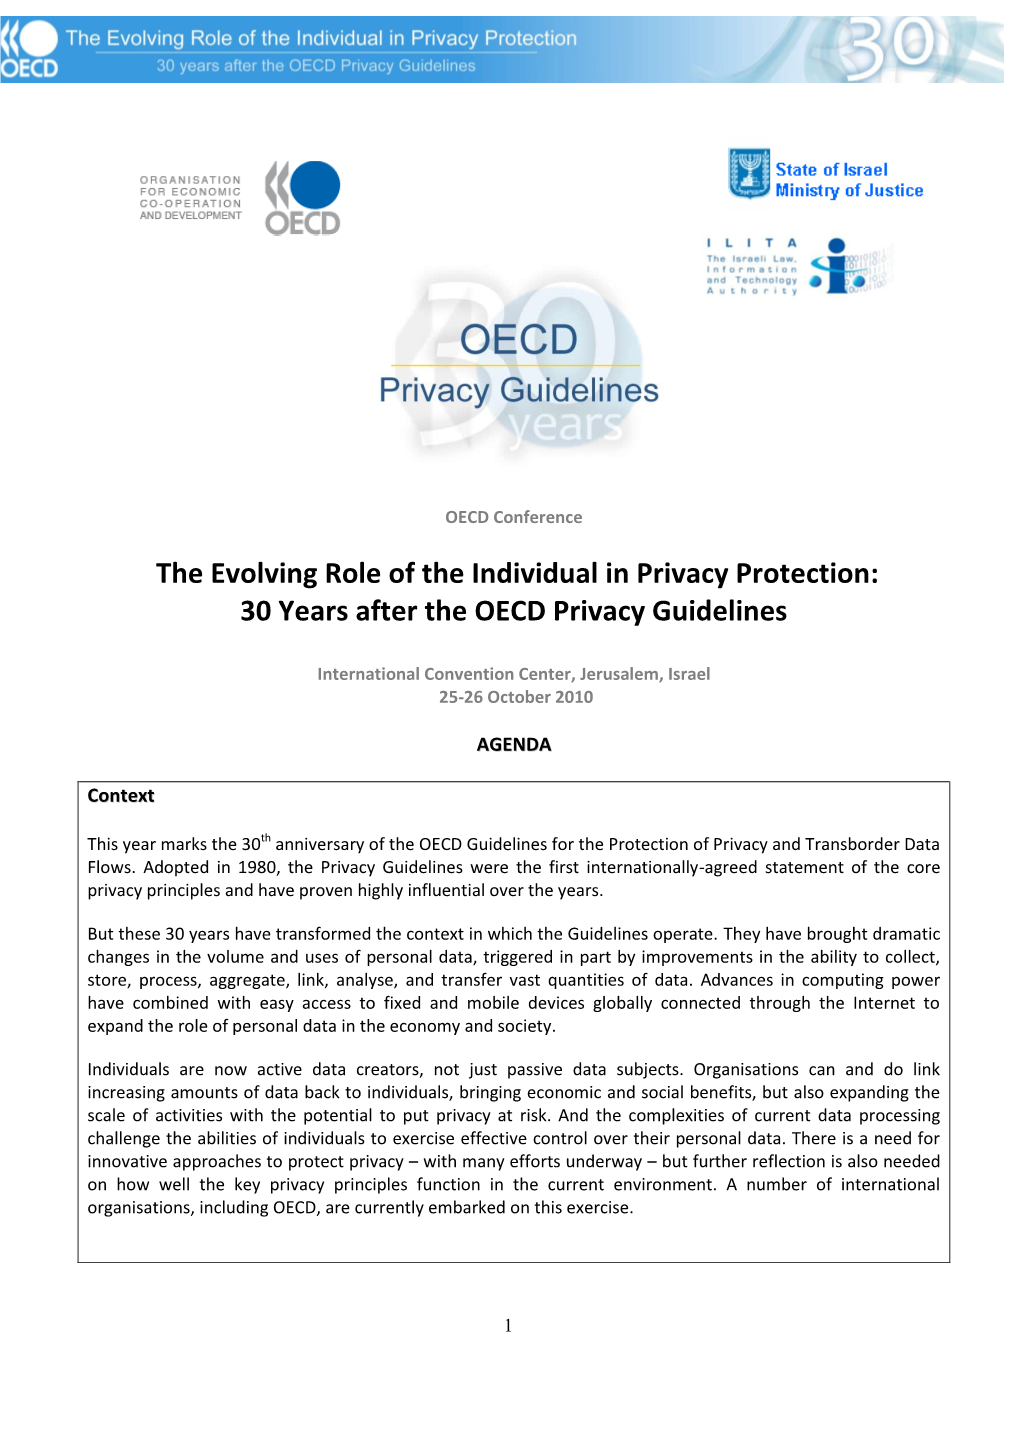 The Evolving Role of the Individual in Privacy Protection: 30 Years After the OECD Privacy Guidelines